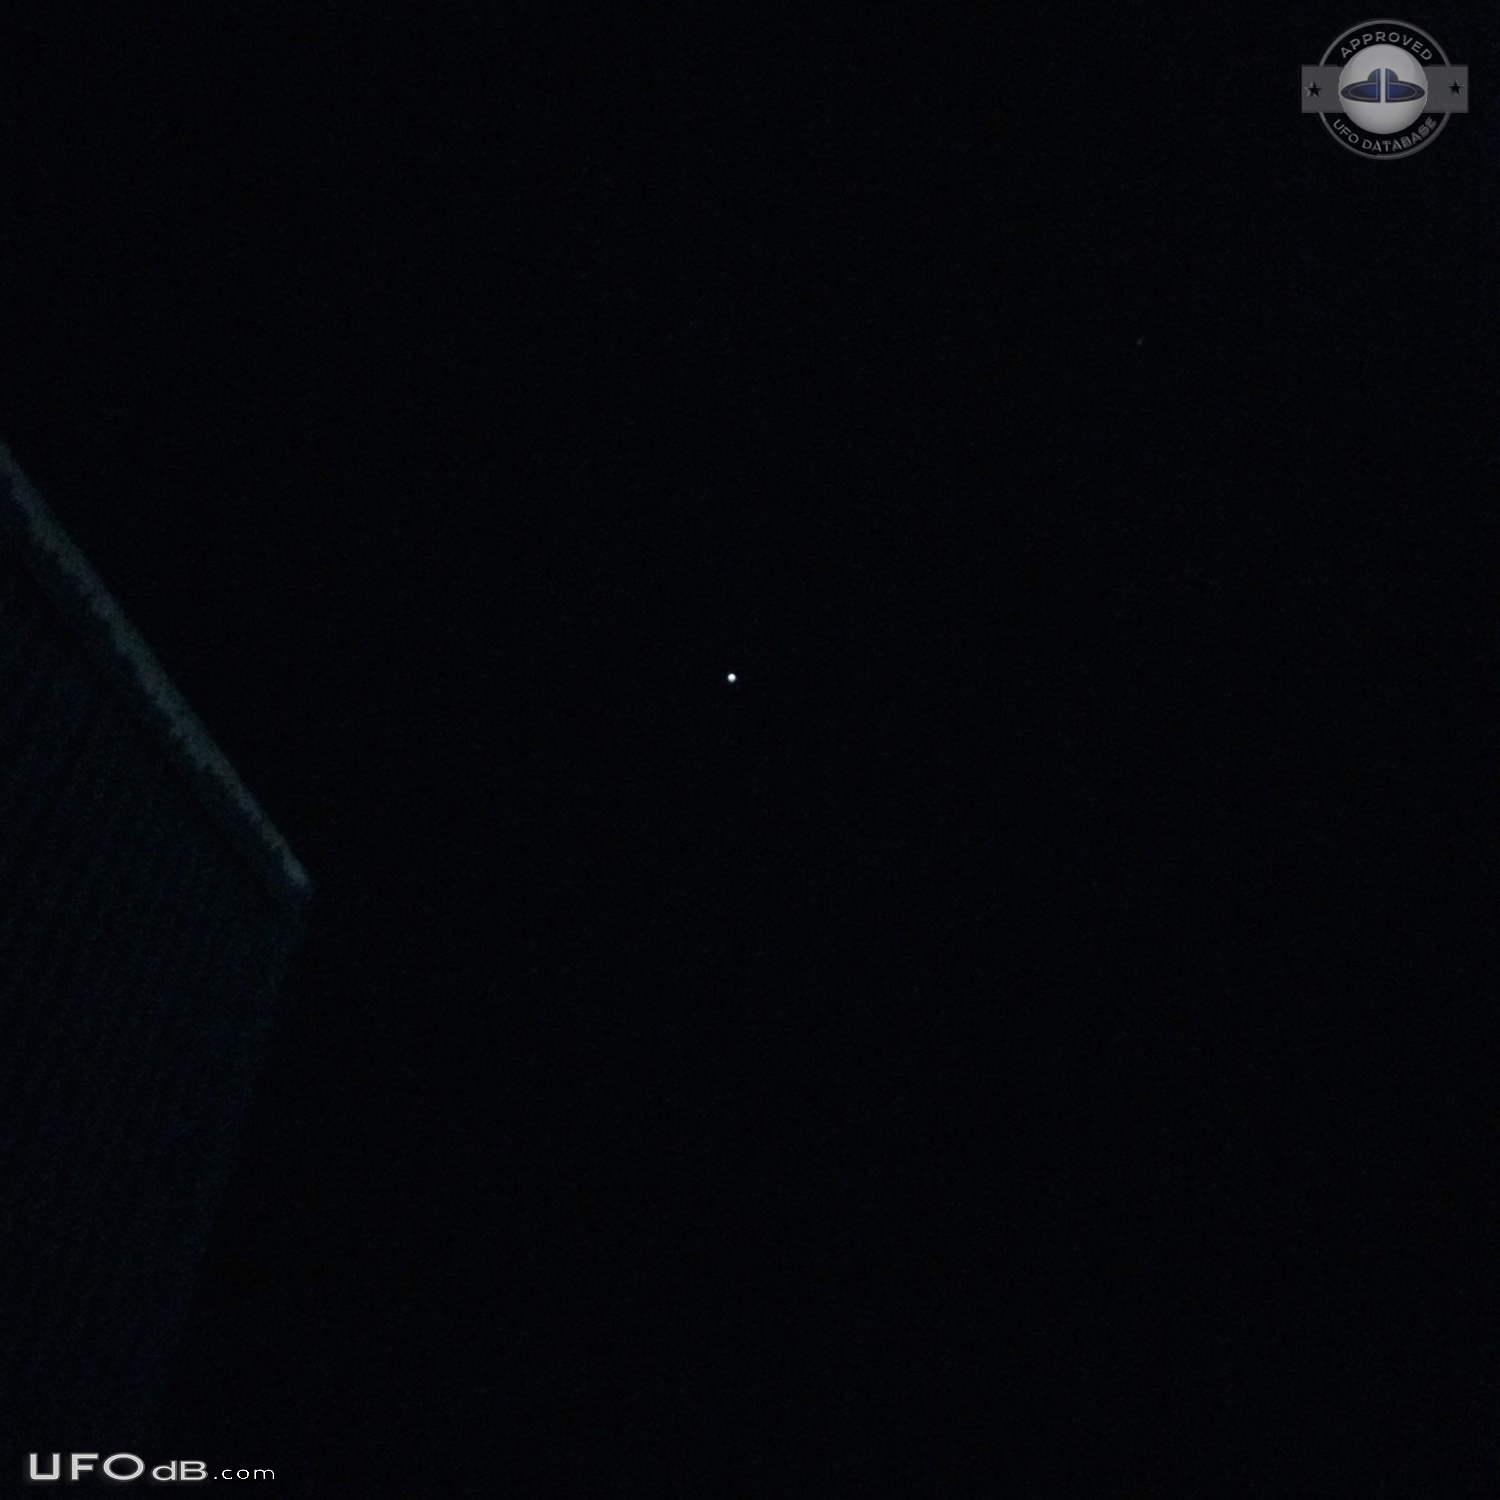 Was curious , below a star seemed there was a UFO Toronto Ontario Cana UFO Picture #784-1